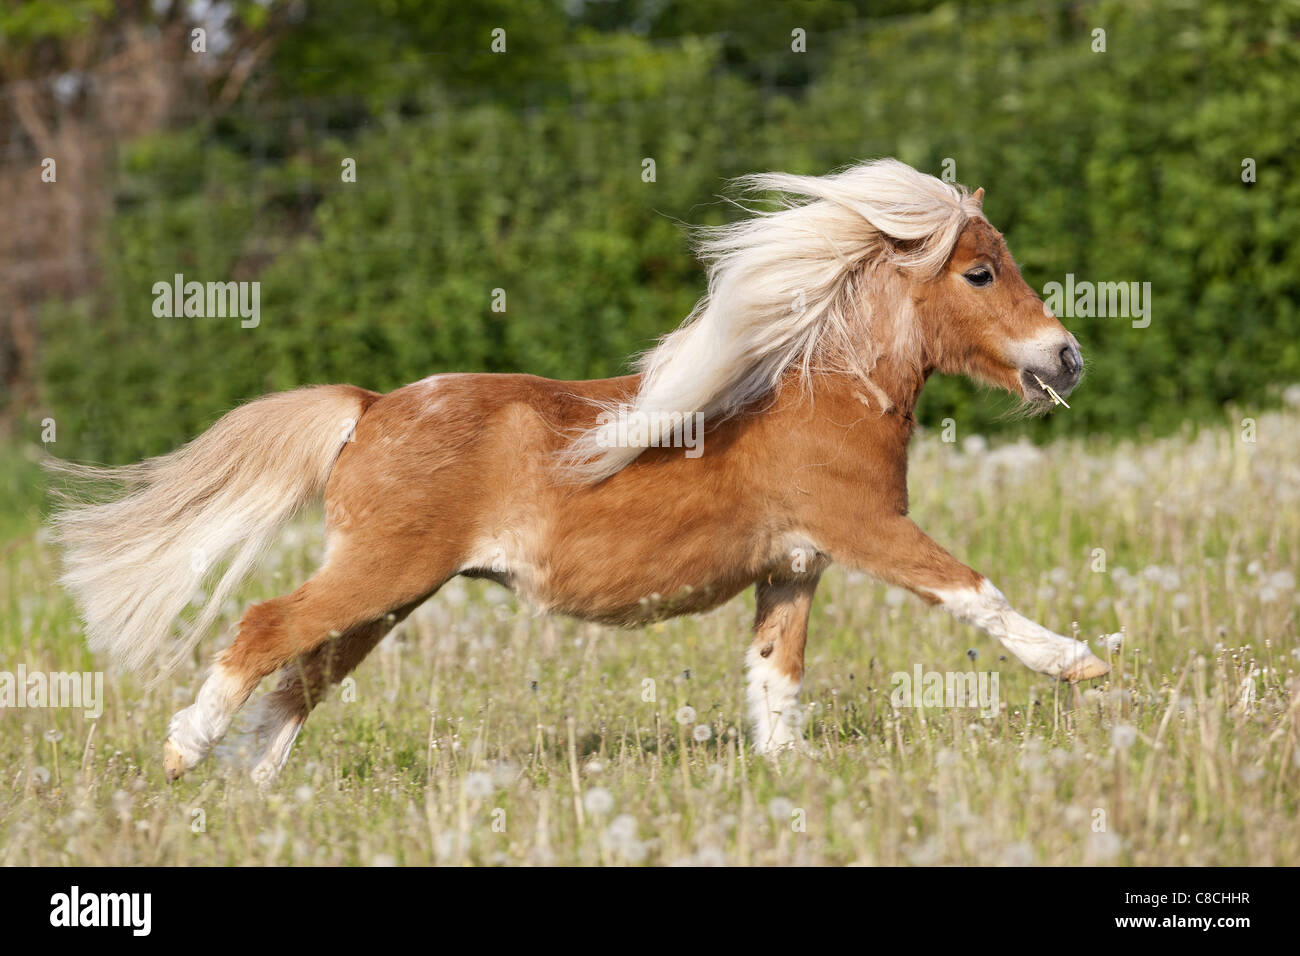 Falabella horse galloping on a meadow Stock Photo